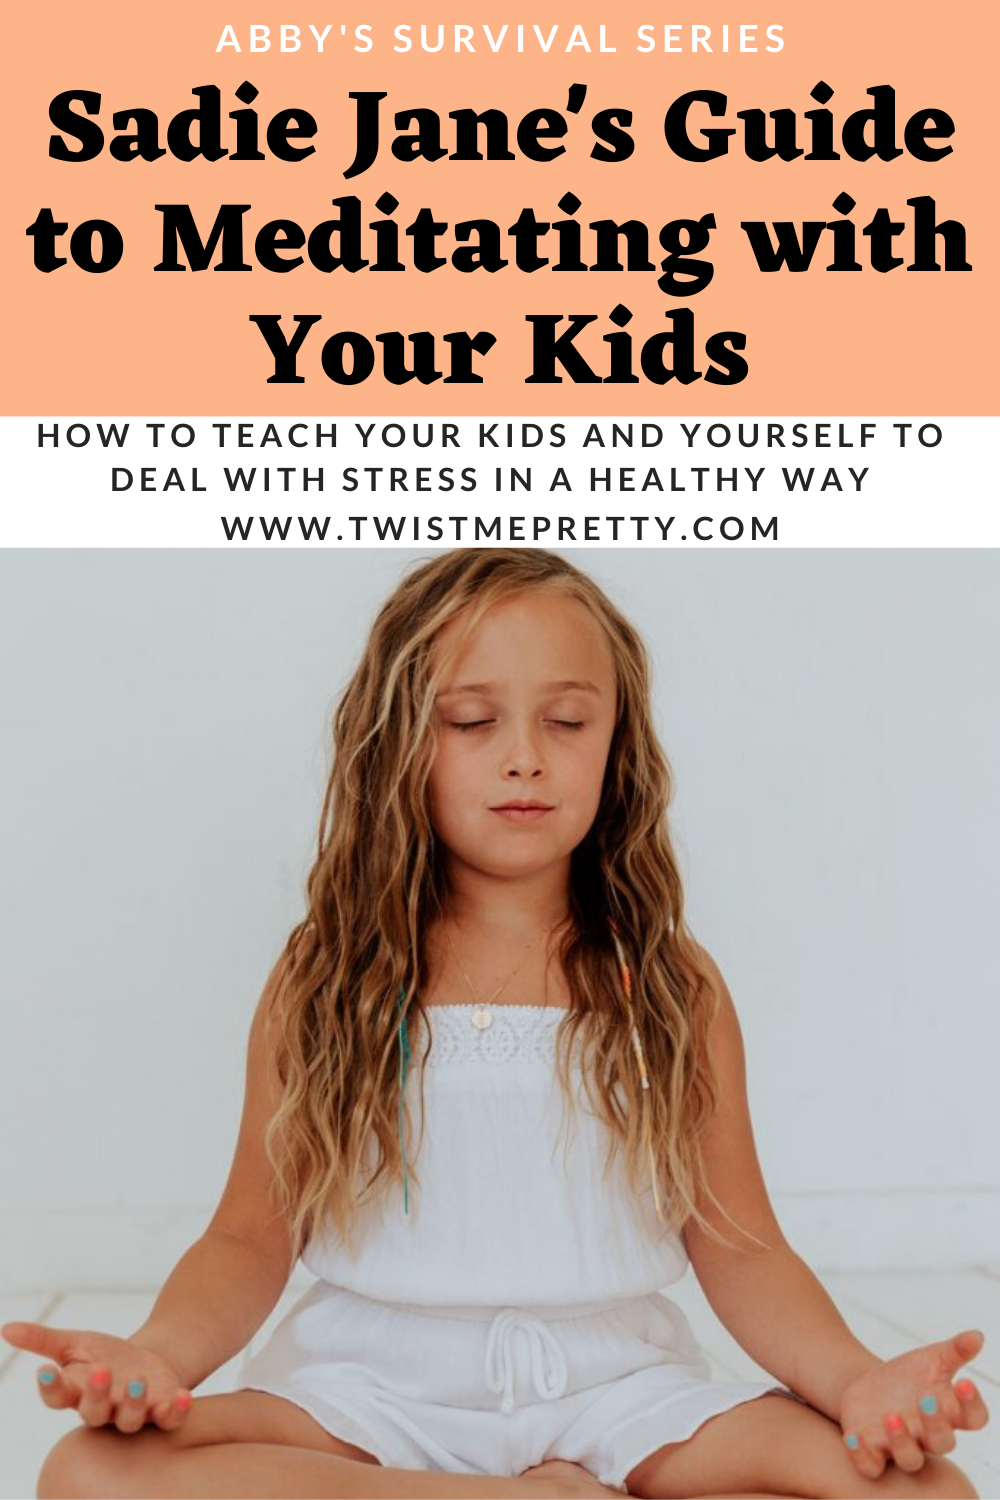 Abby's Survival Series: Sadie Jane's Guide to Meditating with Your Kids www.TwistMePretty.com